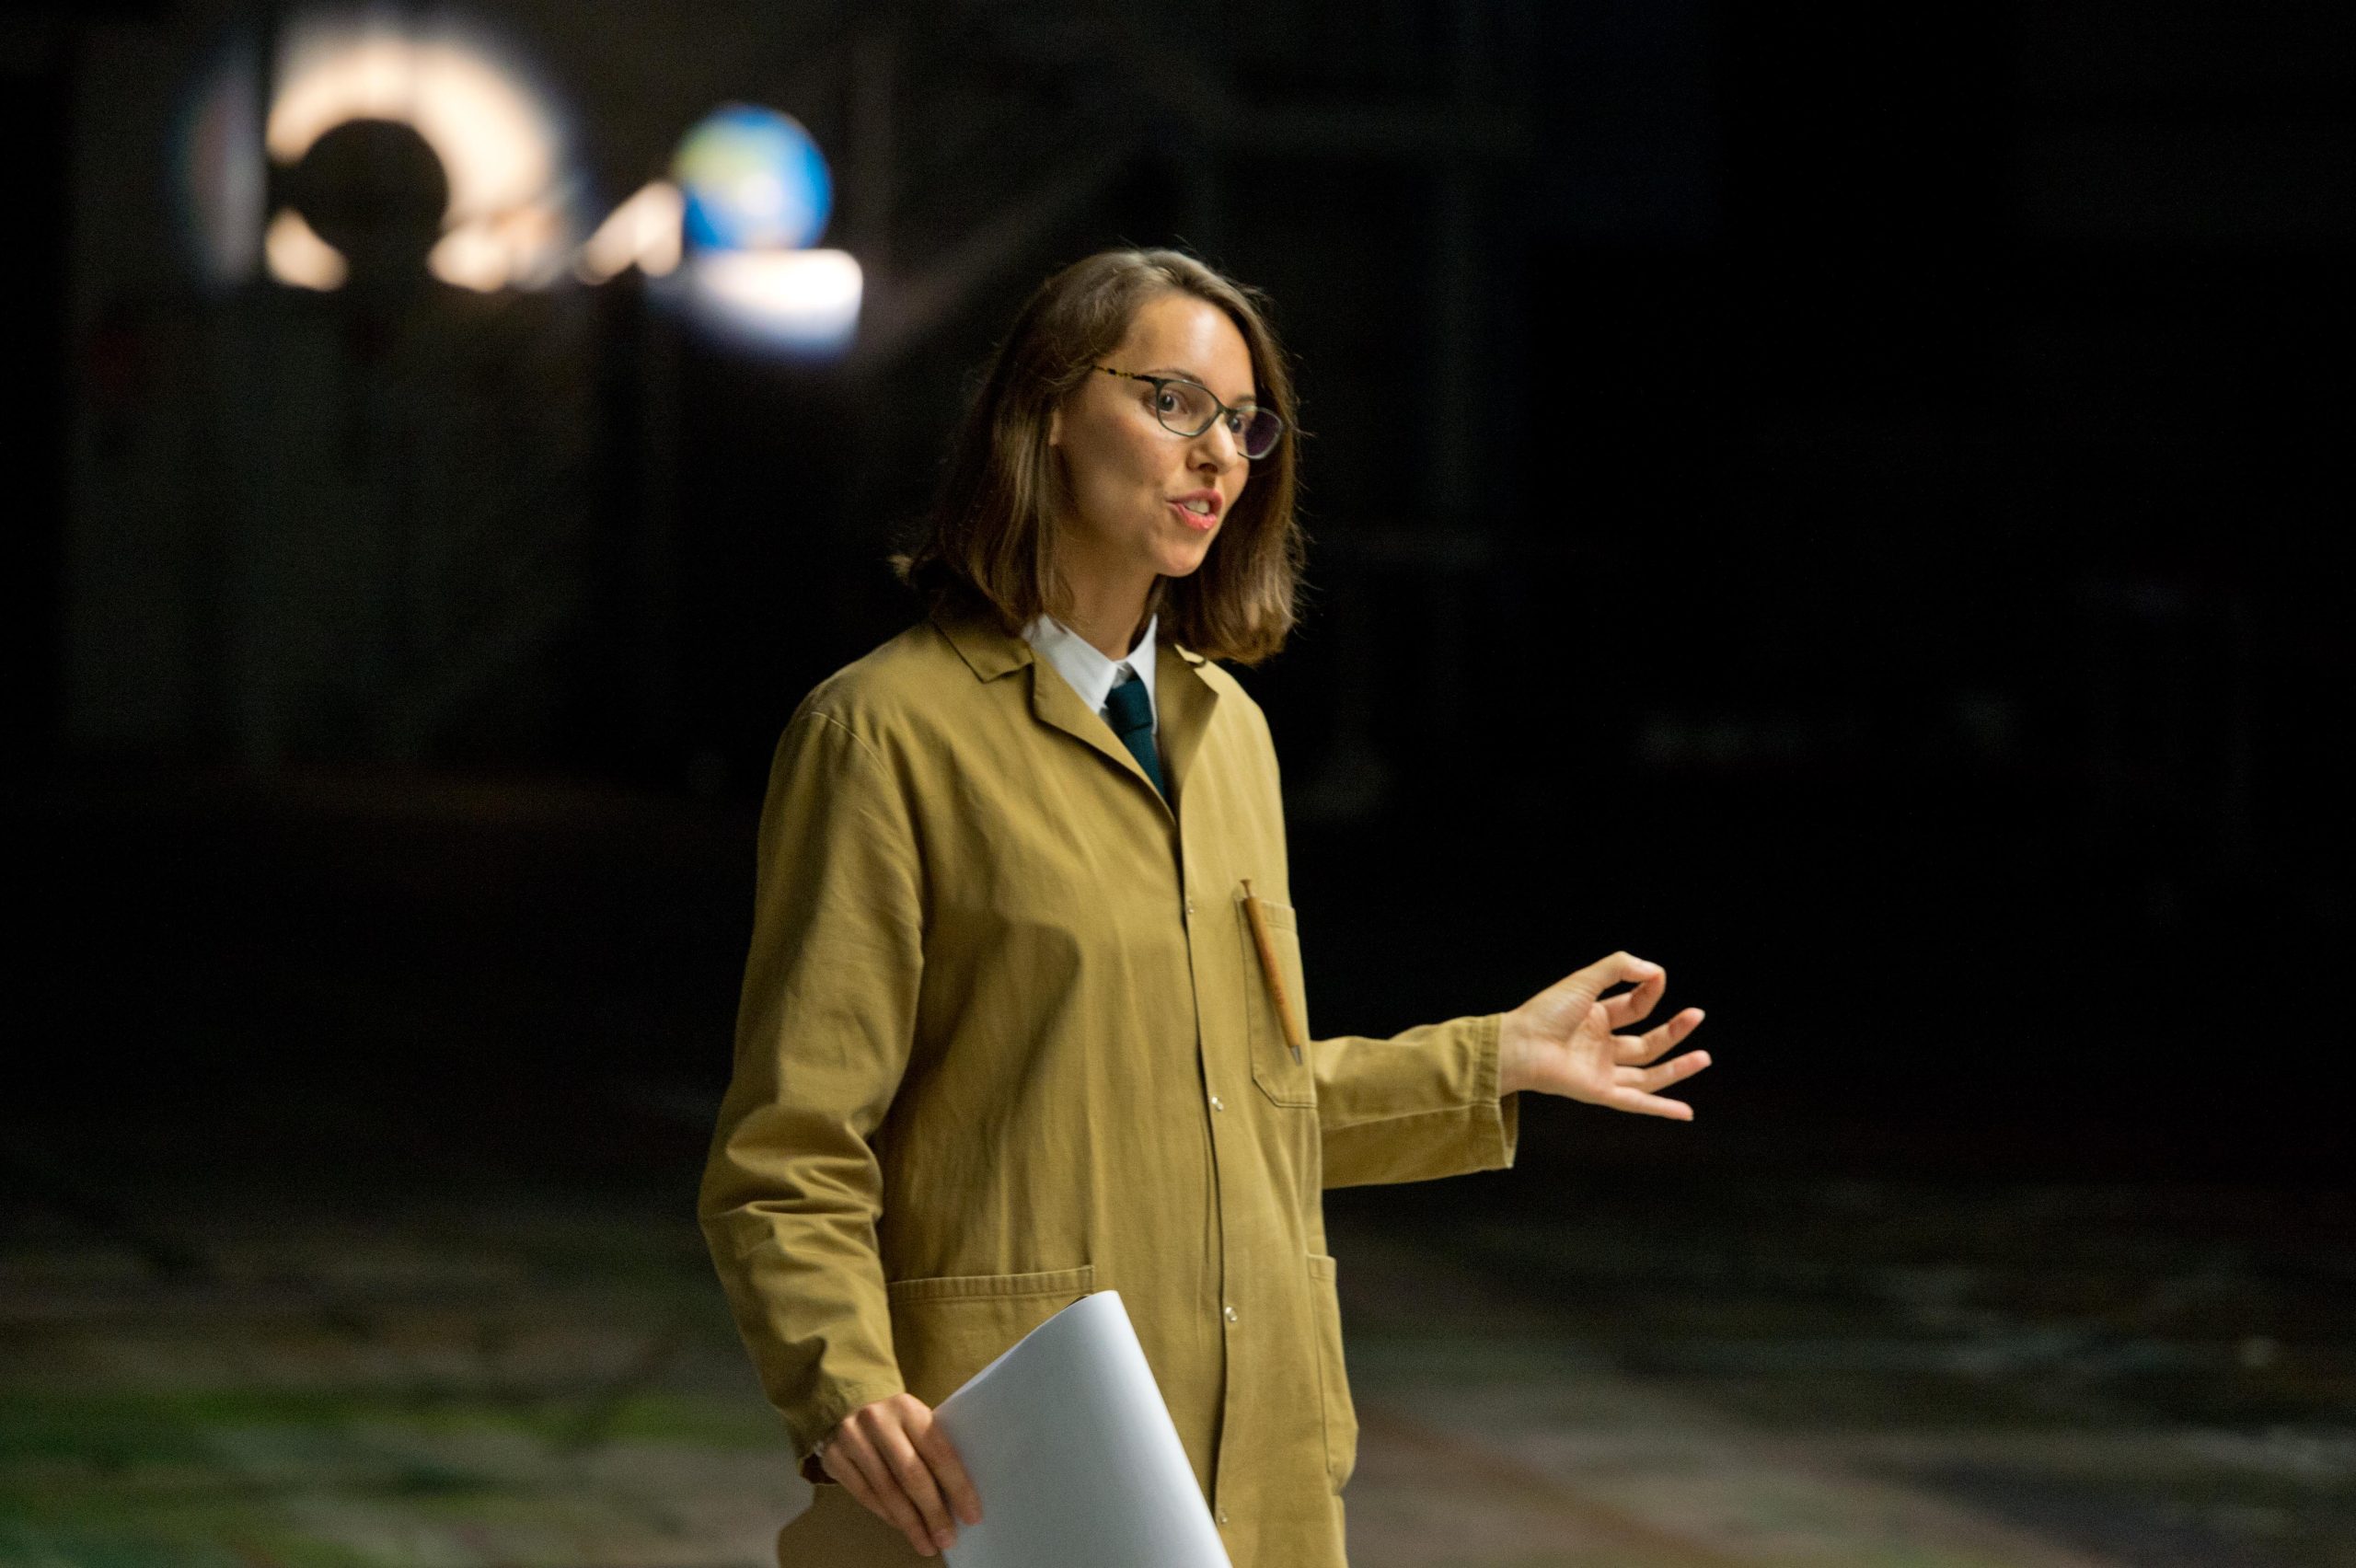 A female warehouse attendent holding a clip -board speaks, behind her in the distance, illuminated in the dark is a globe, a model of the planet earth.